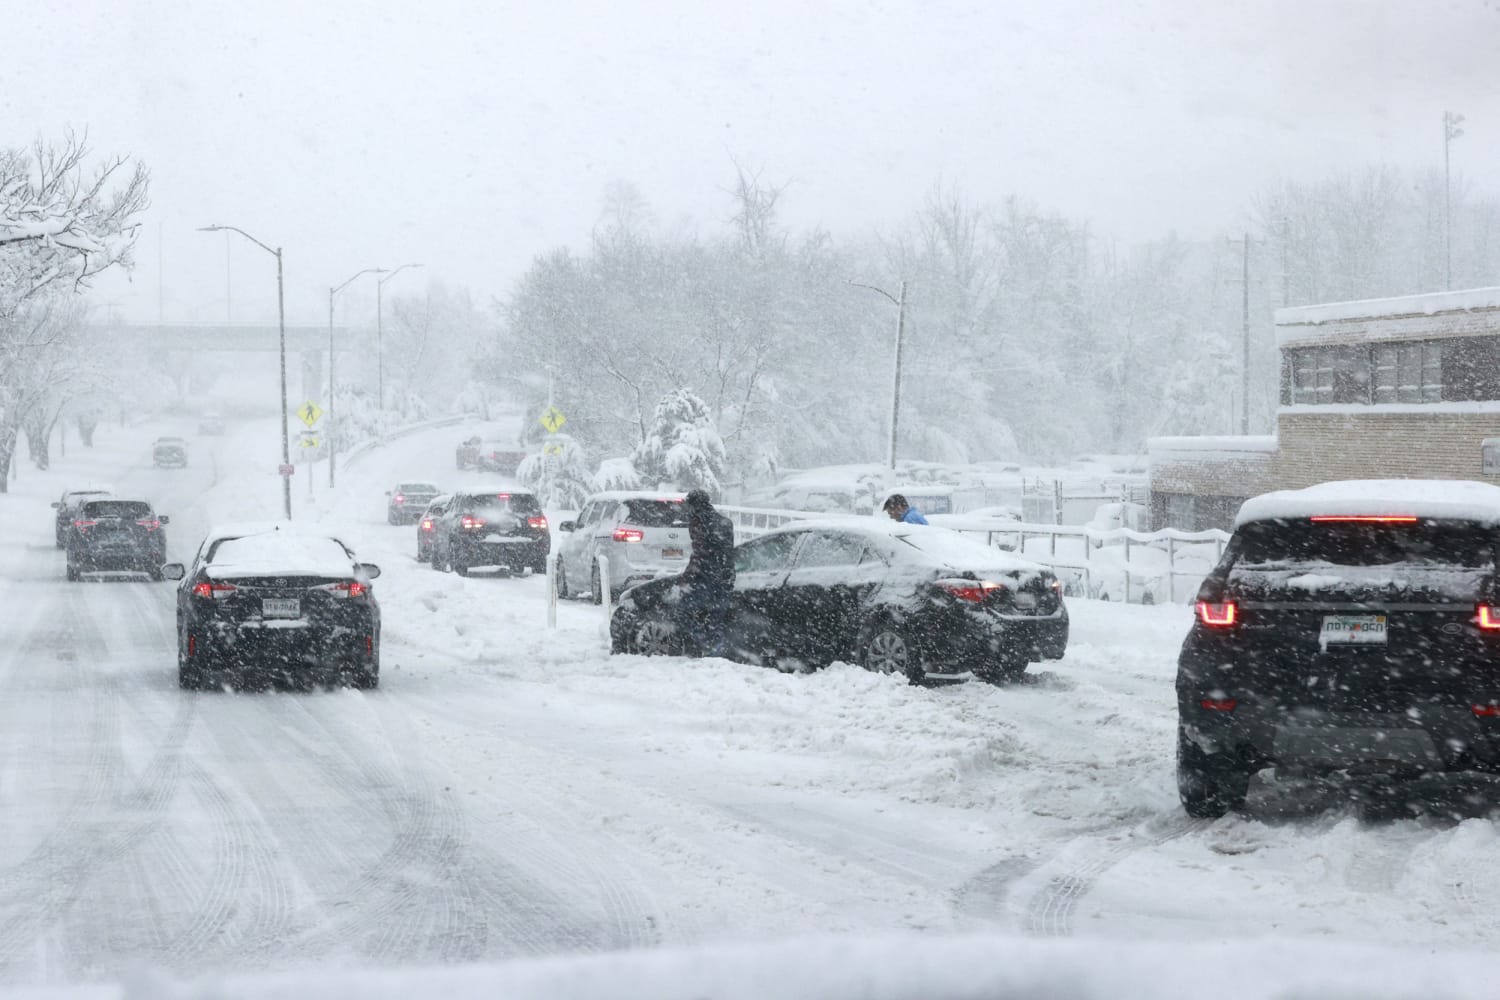 Drivers stranded for hours on I-95 in Virginia after winter storm describe chaos